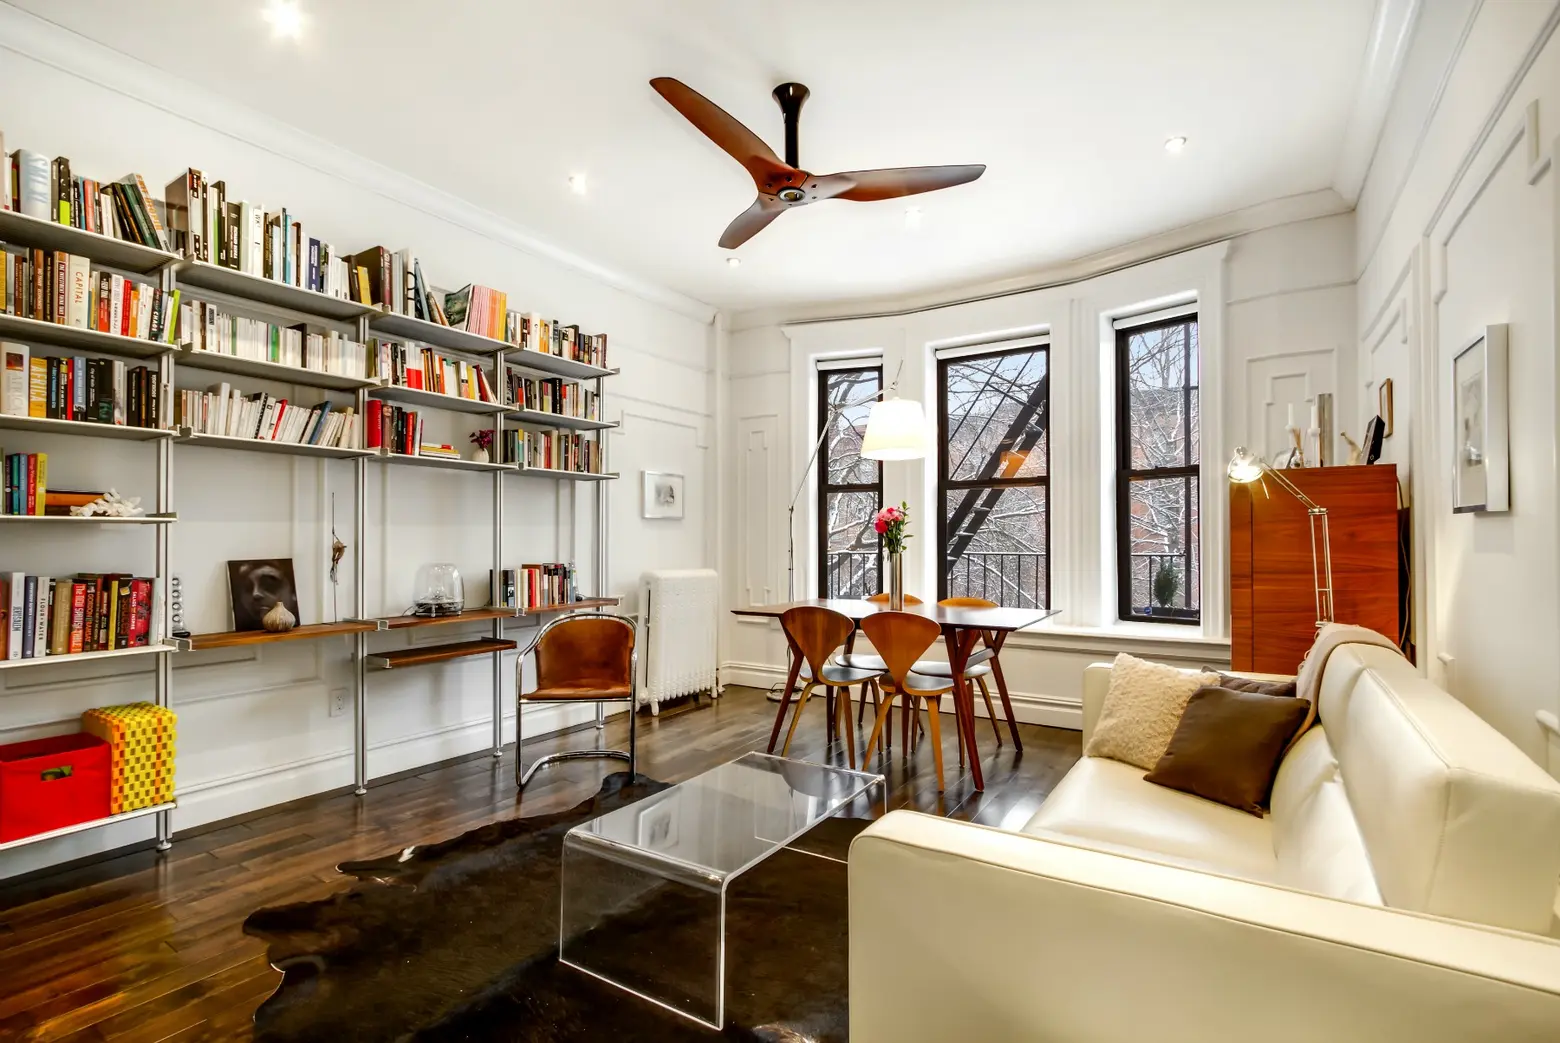 Architect/Owner of This $800K Park Slope Co-op Gut Renovated it Herself